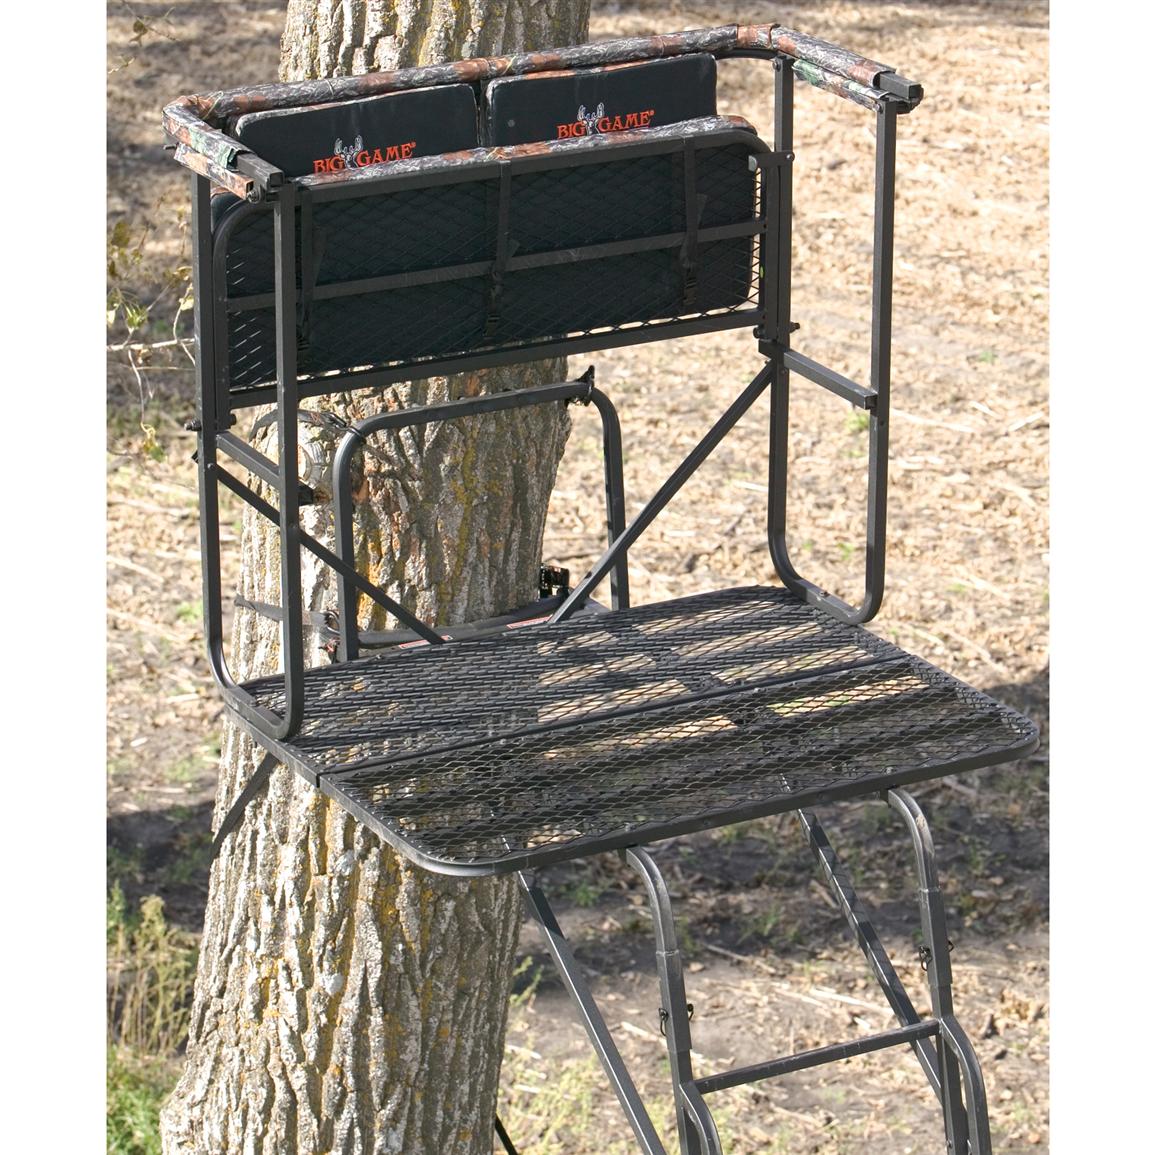 Muddy Outdoors The Prestige 16' Double Ladder Treestand ...